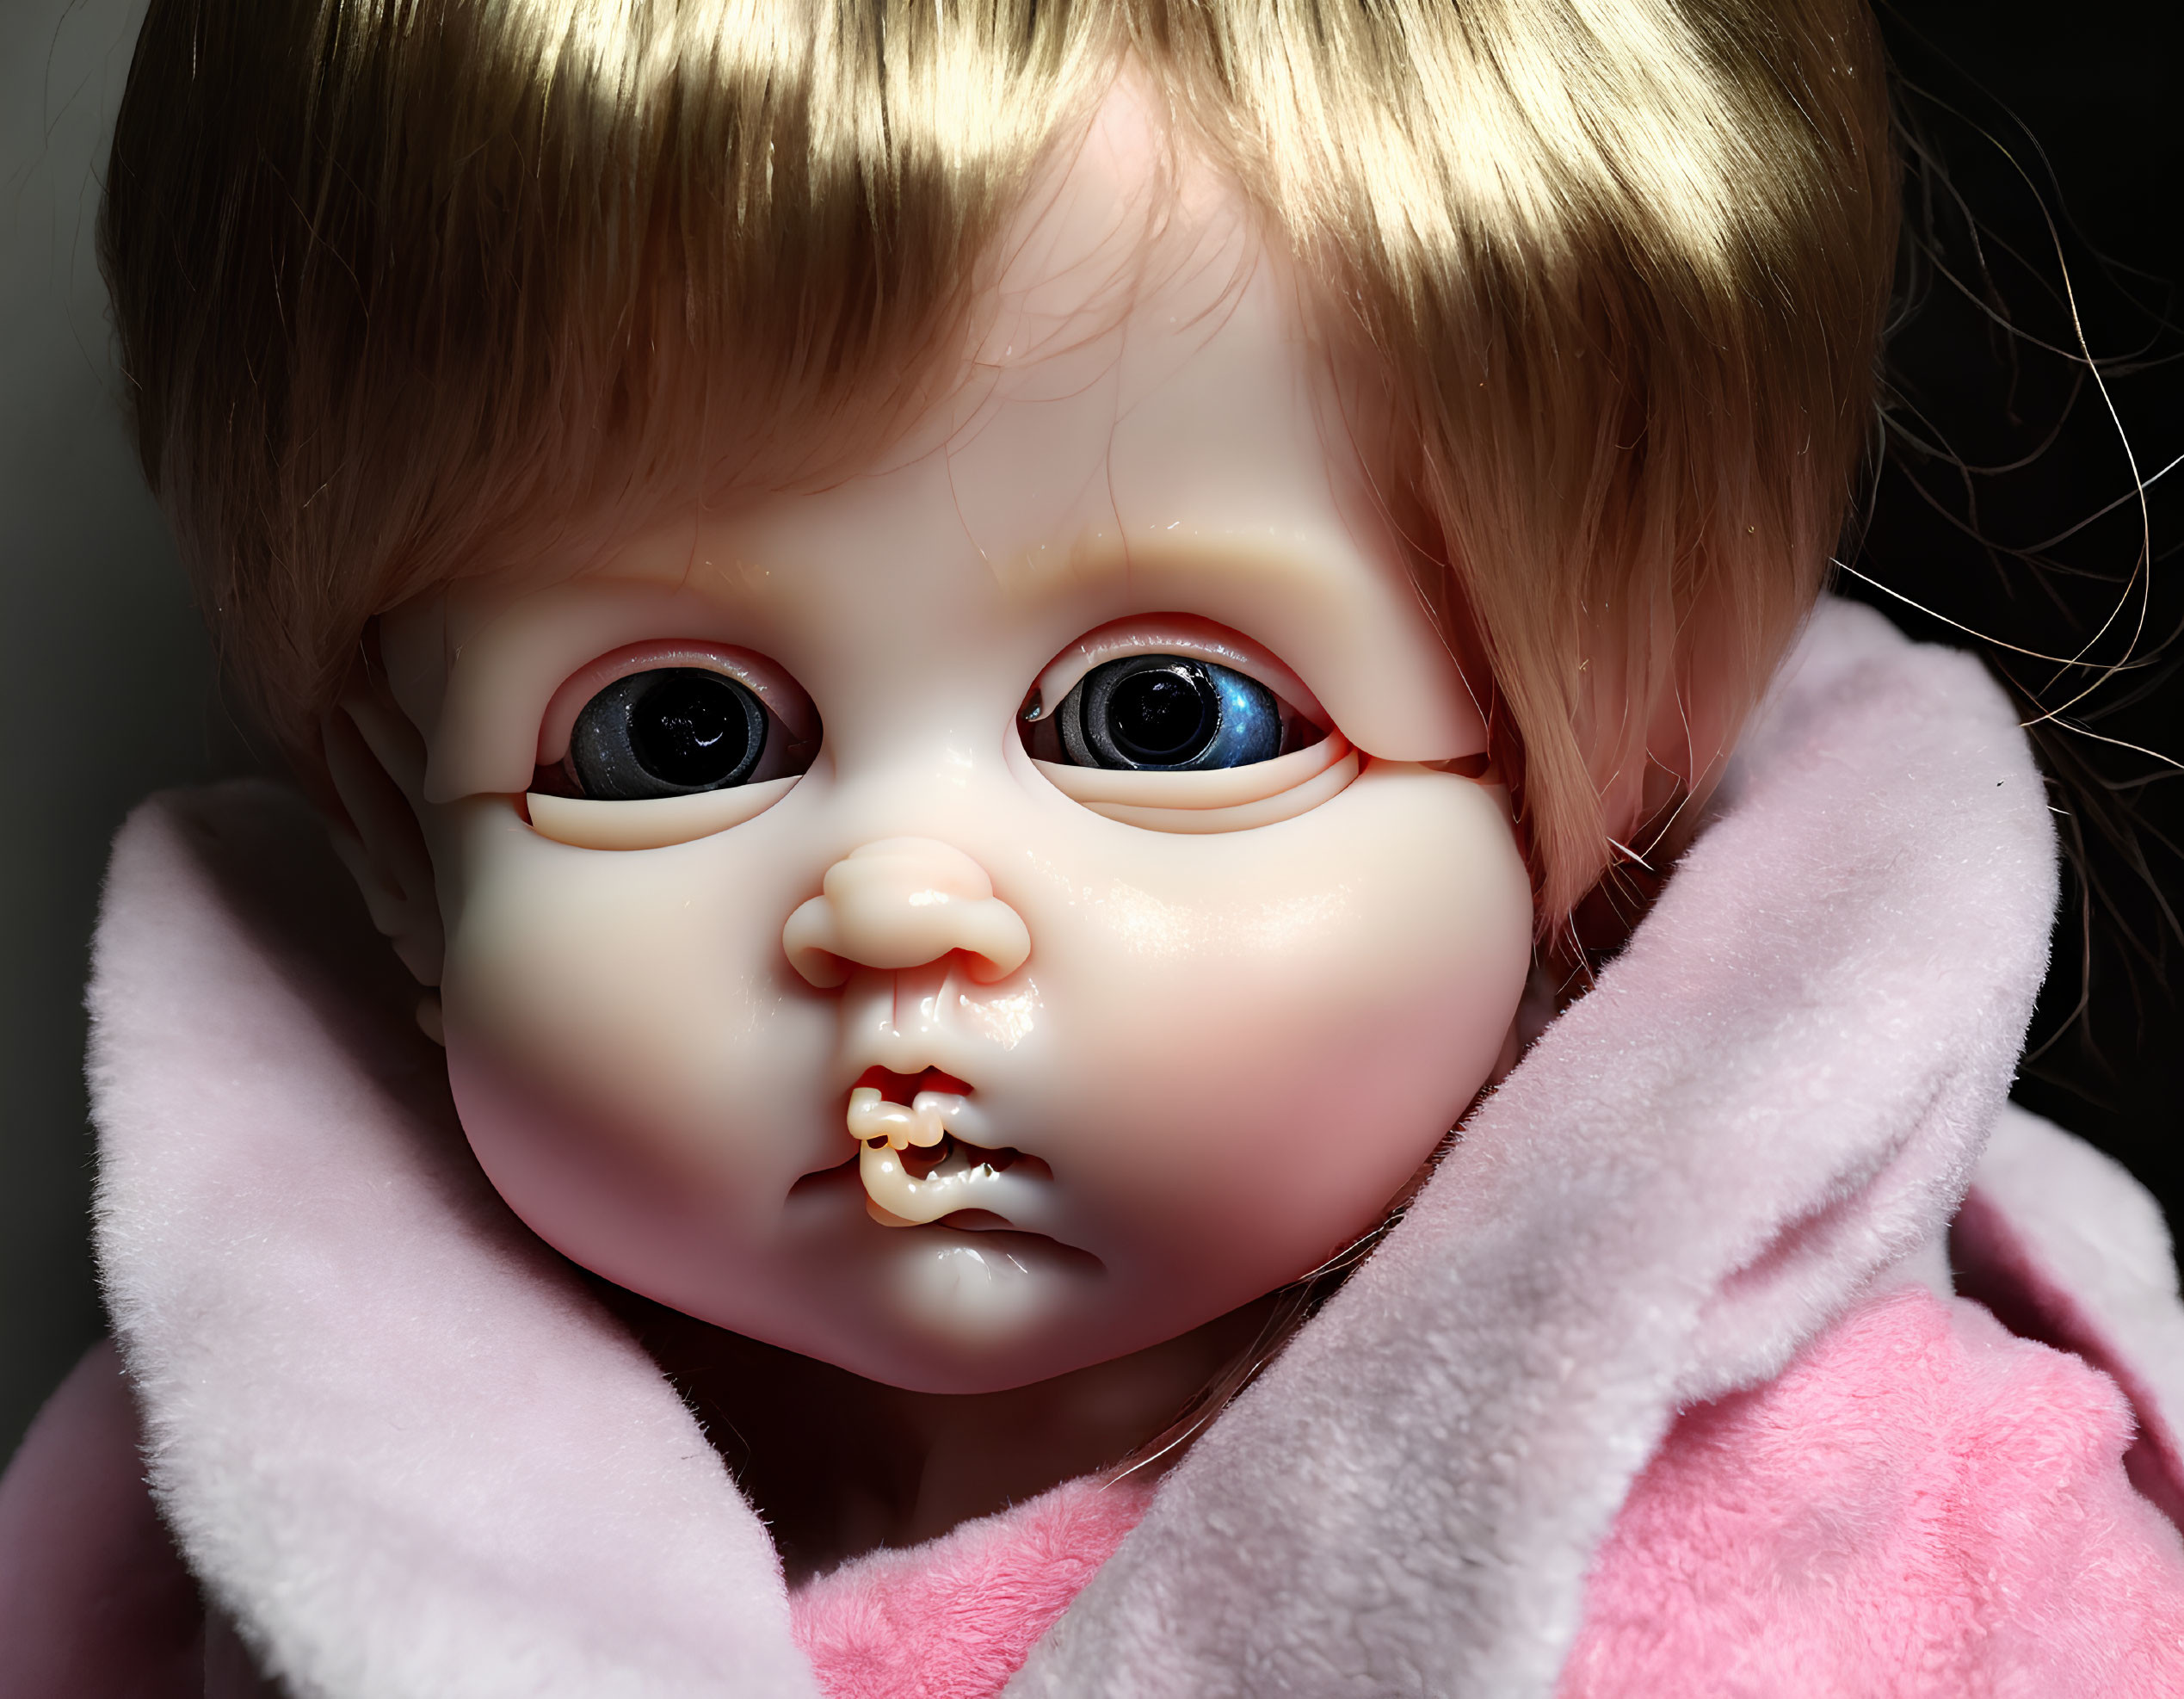 Blonde Hair Doll with Blue Eyes in Pink Outfit, Damaged Eye